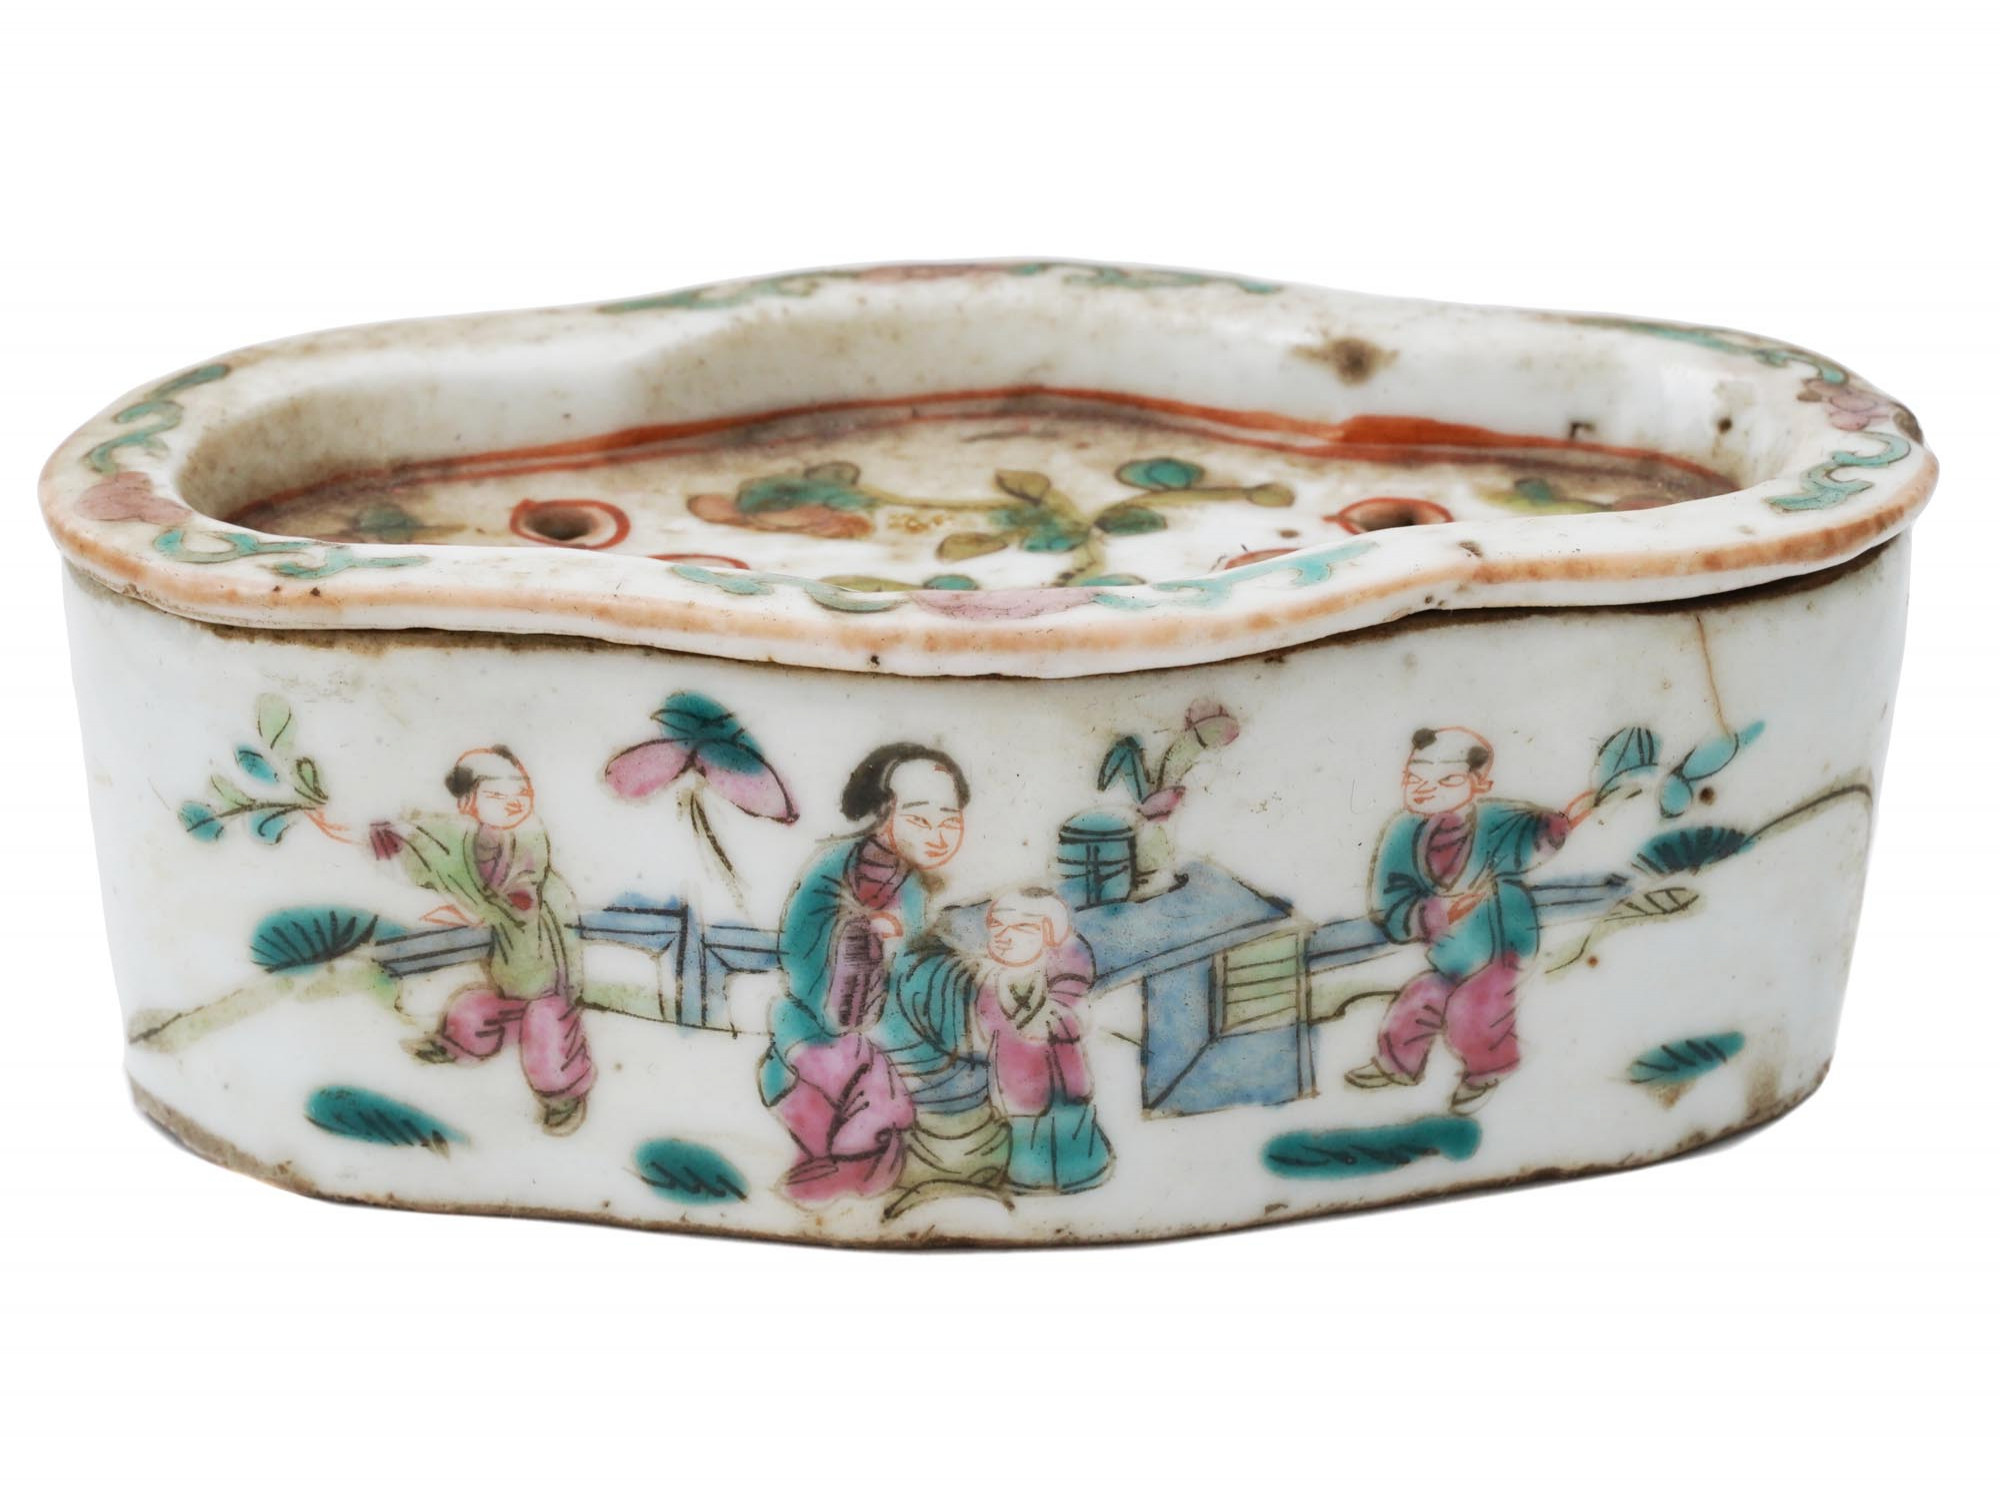 ANTIQUE CHINESE HAND ENAMEL PORCELAIN CRICKET CAGE PIC-0